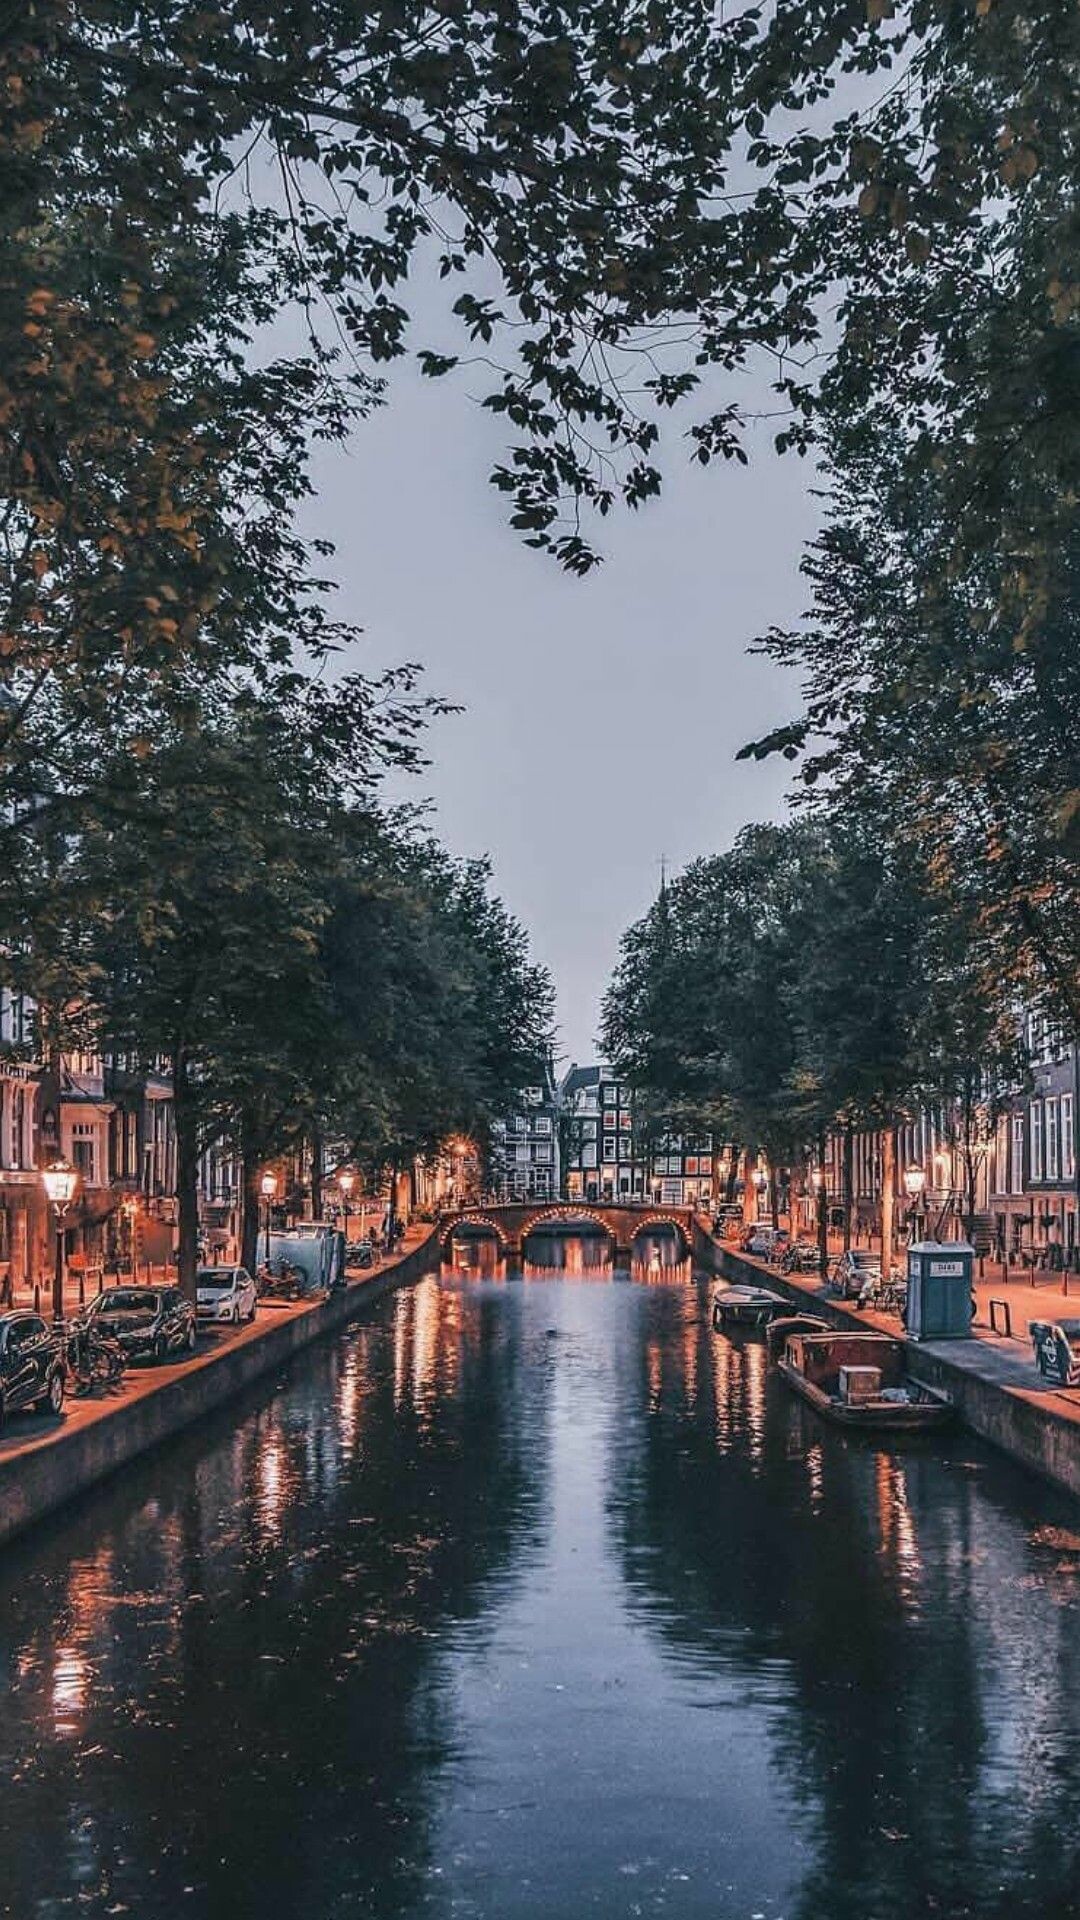 Amsterdam: Dutch city, Famous for picturesque canals and bridges to its historic homes. 1080x1920 Full HD Wallpaper.